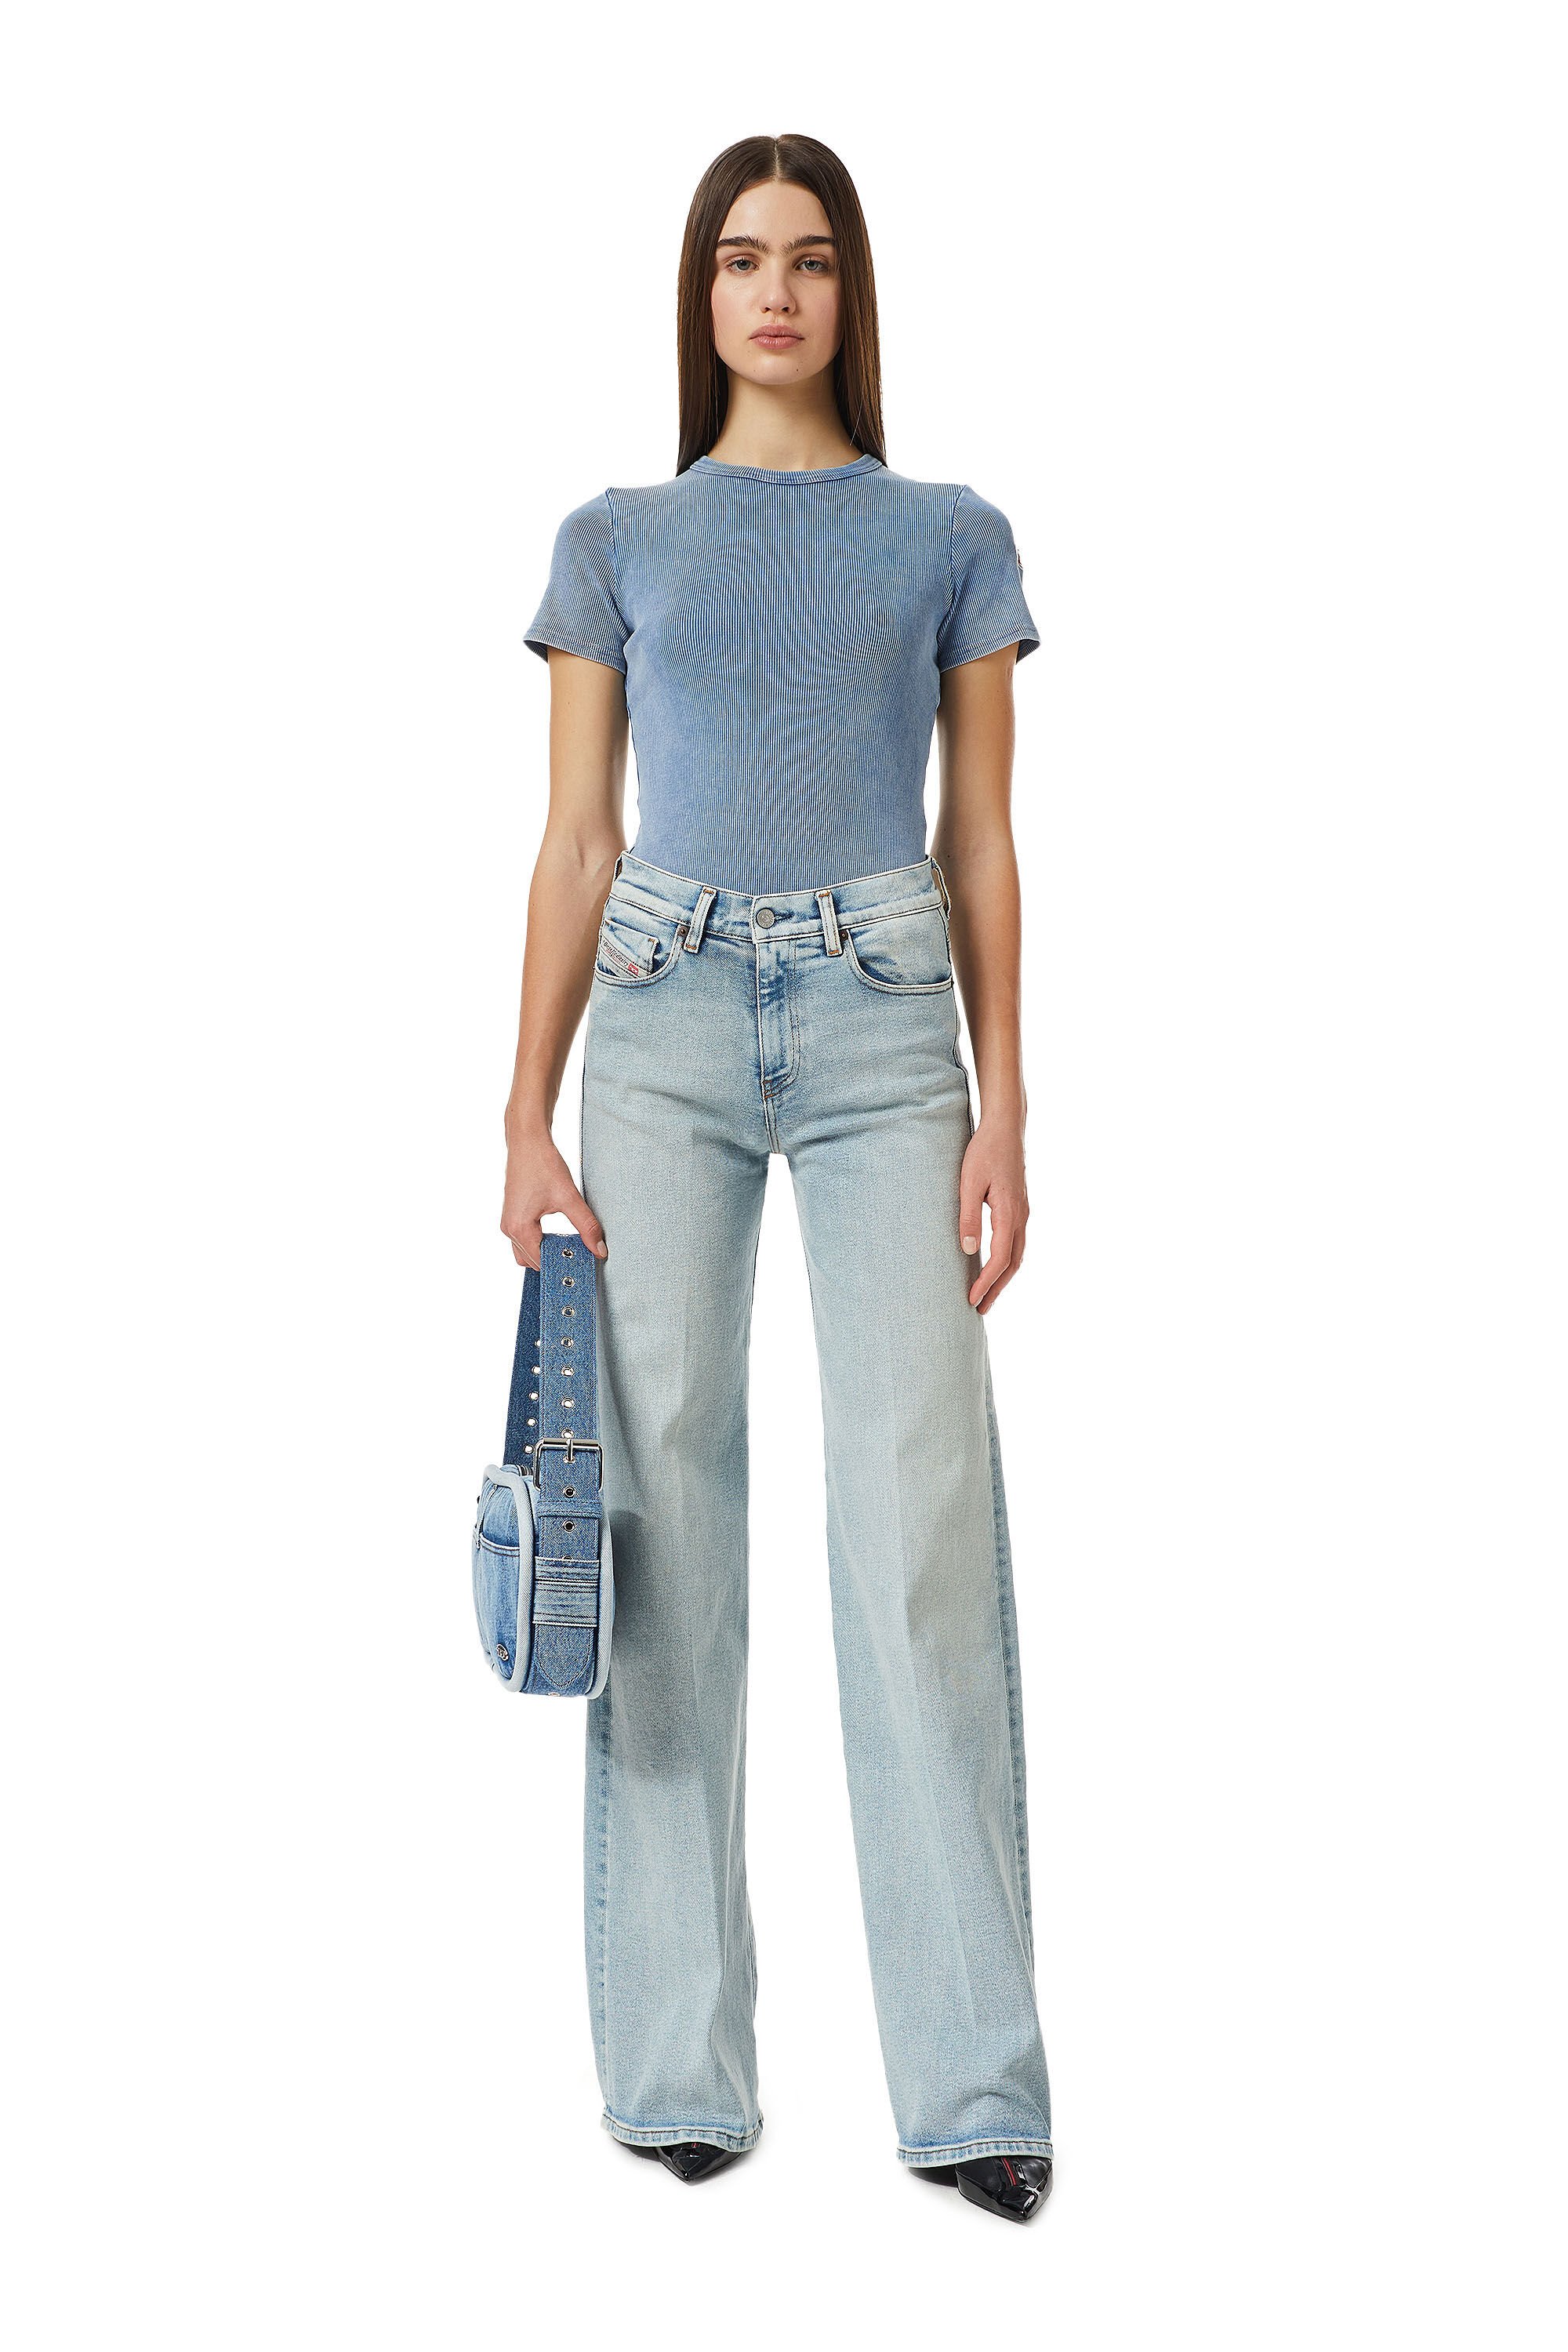 Diesel - 1978 09C08 Bootcut and Flare Jeans, Bleu Clair - Image 1